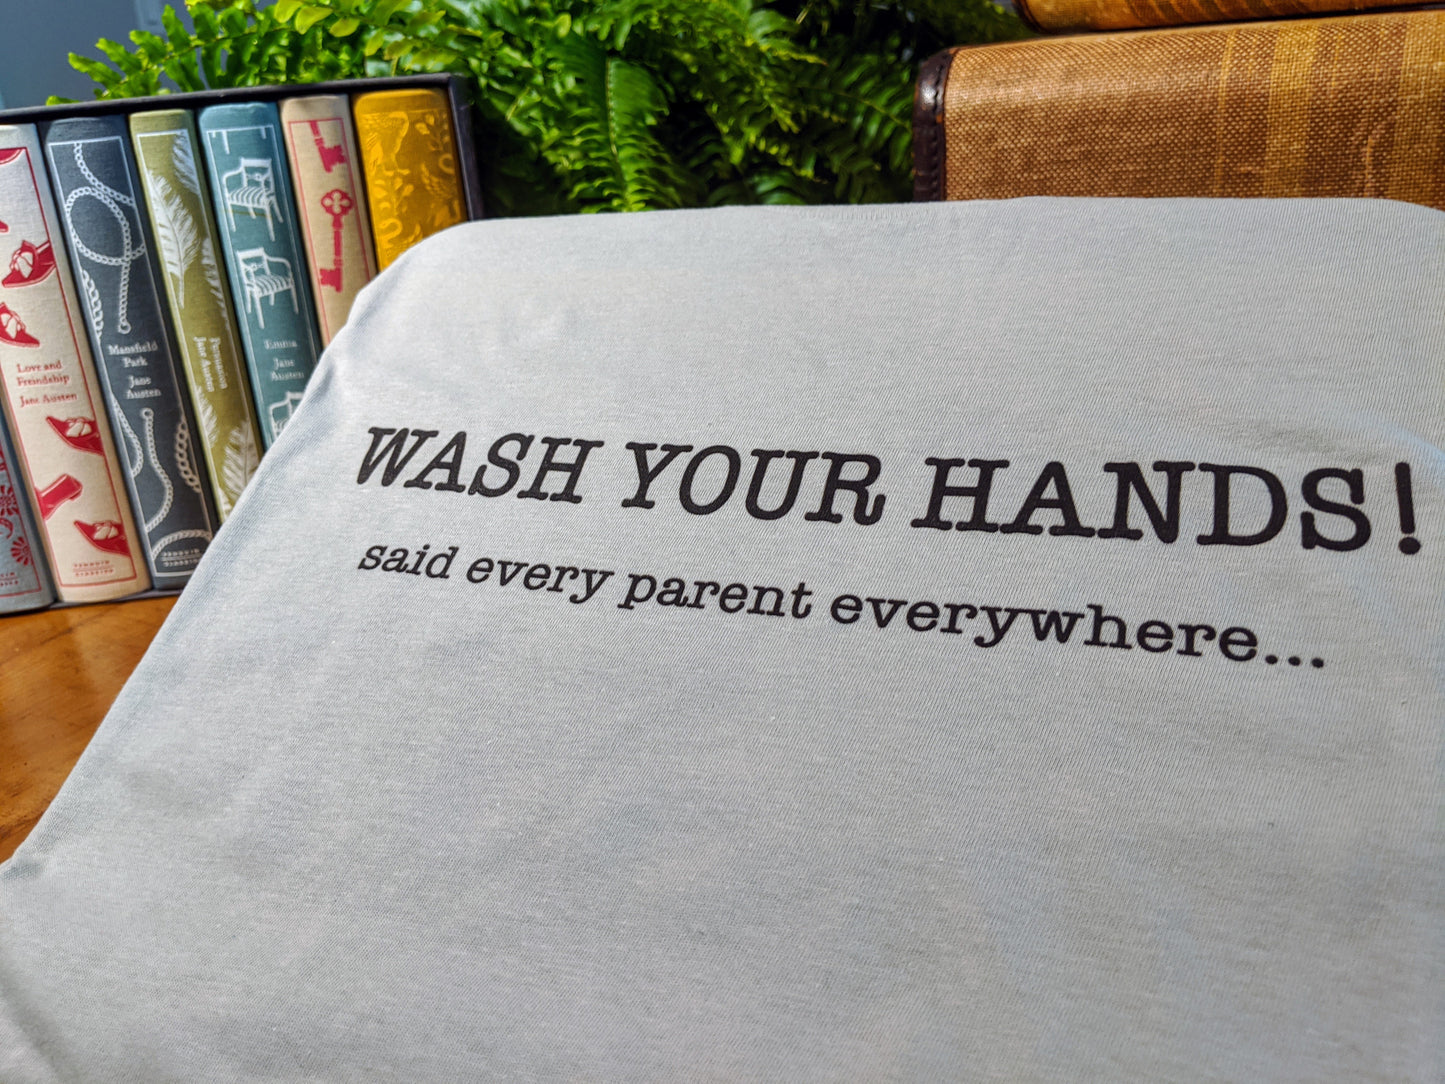 Wash Your Hands! T-shirt